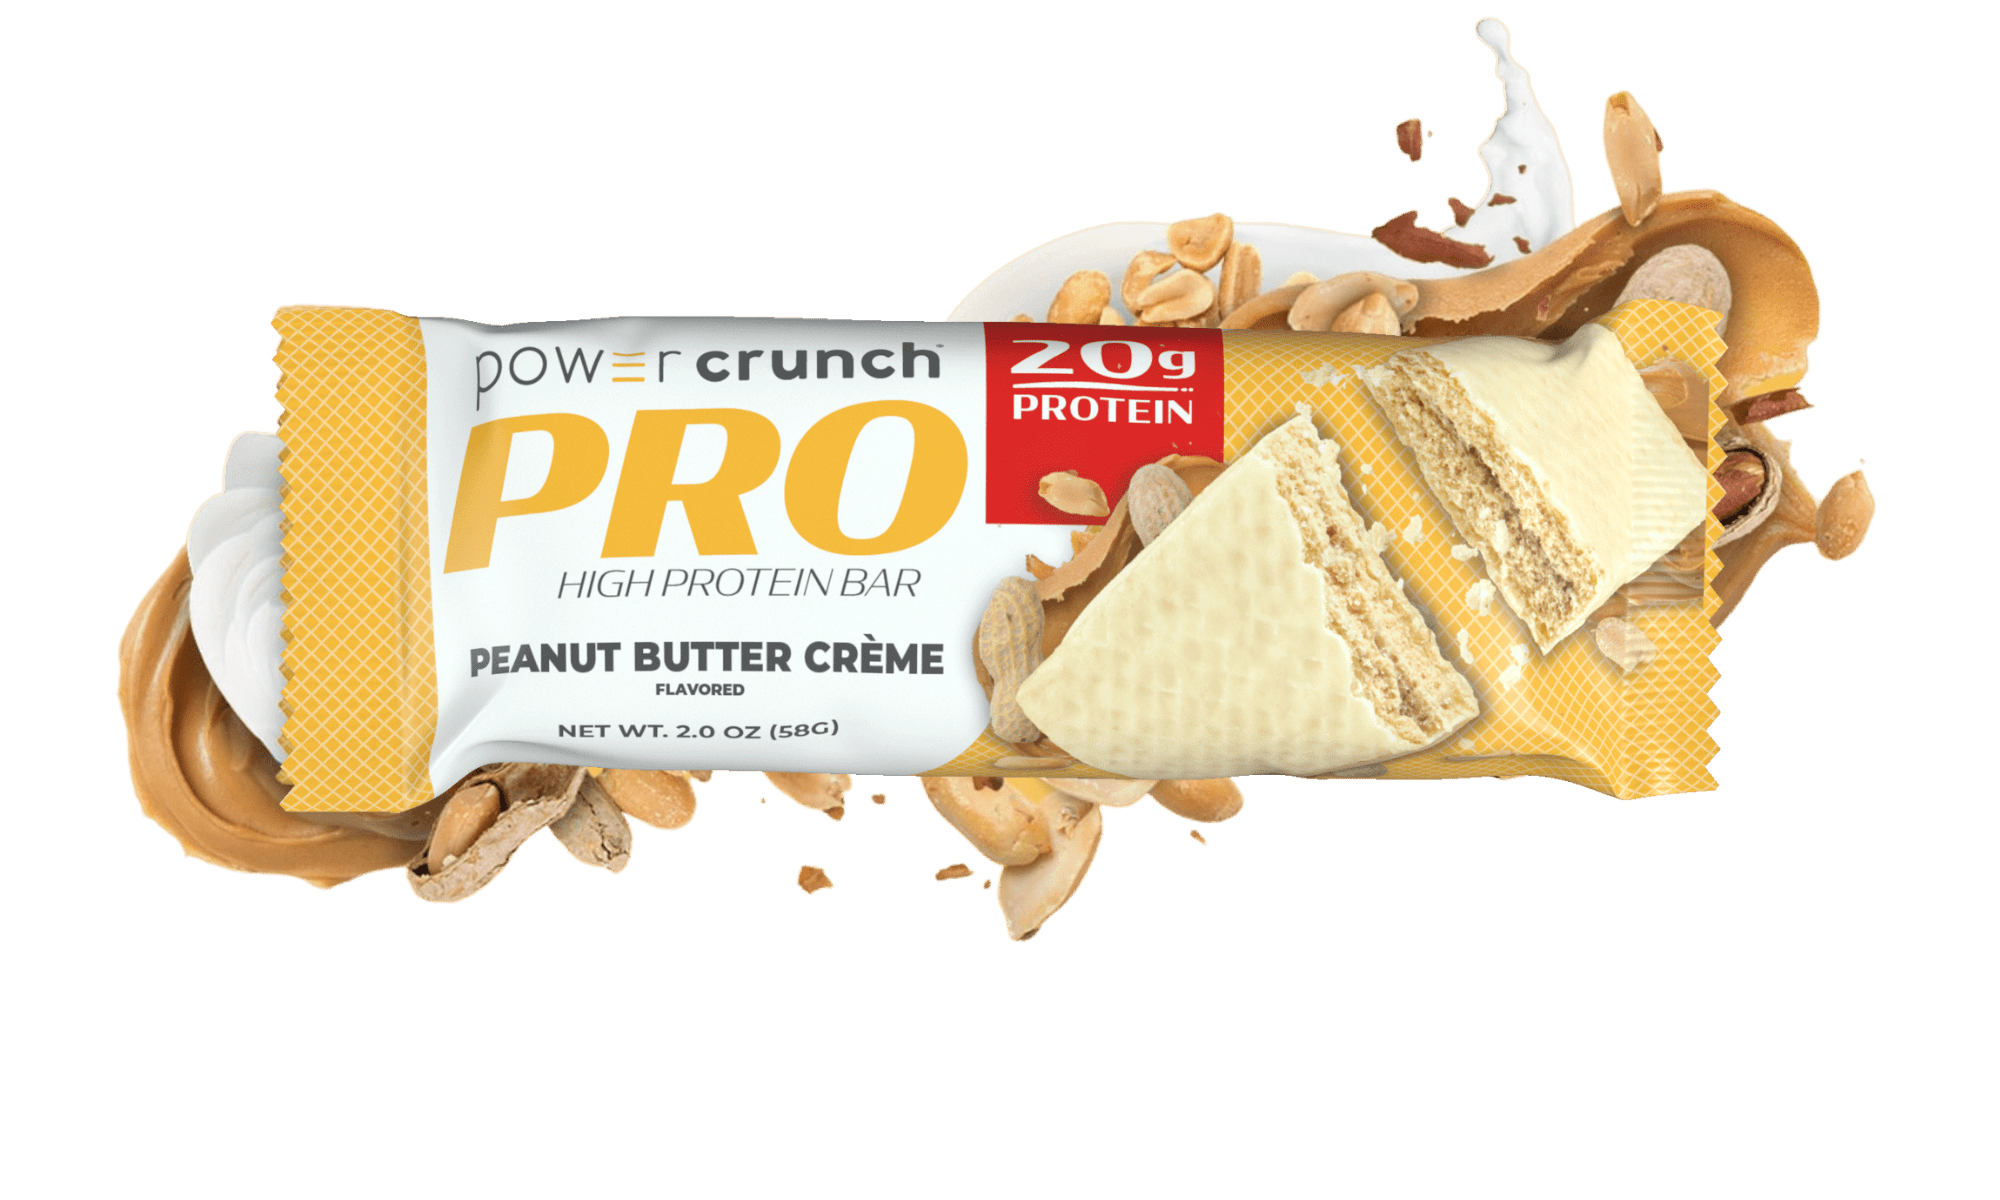 Power Crunch PRO Peanut Butter 20g protein bars pictured with Peanut Butter flavor explosion